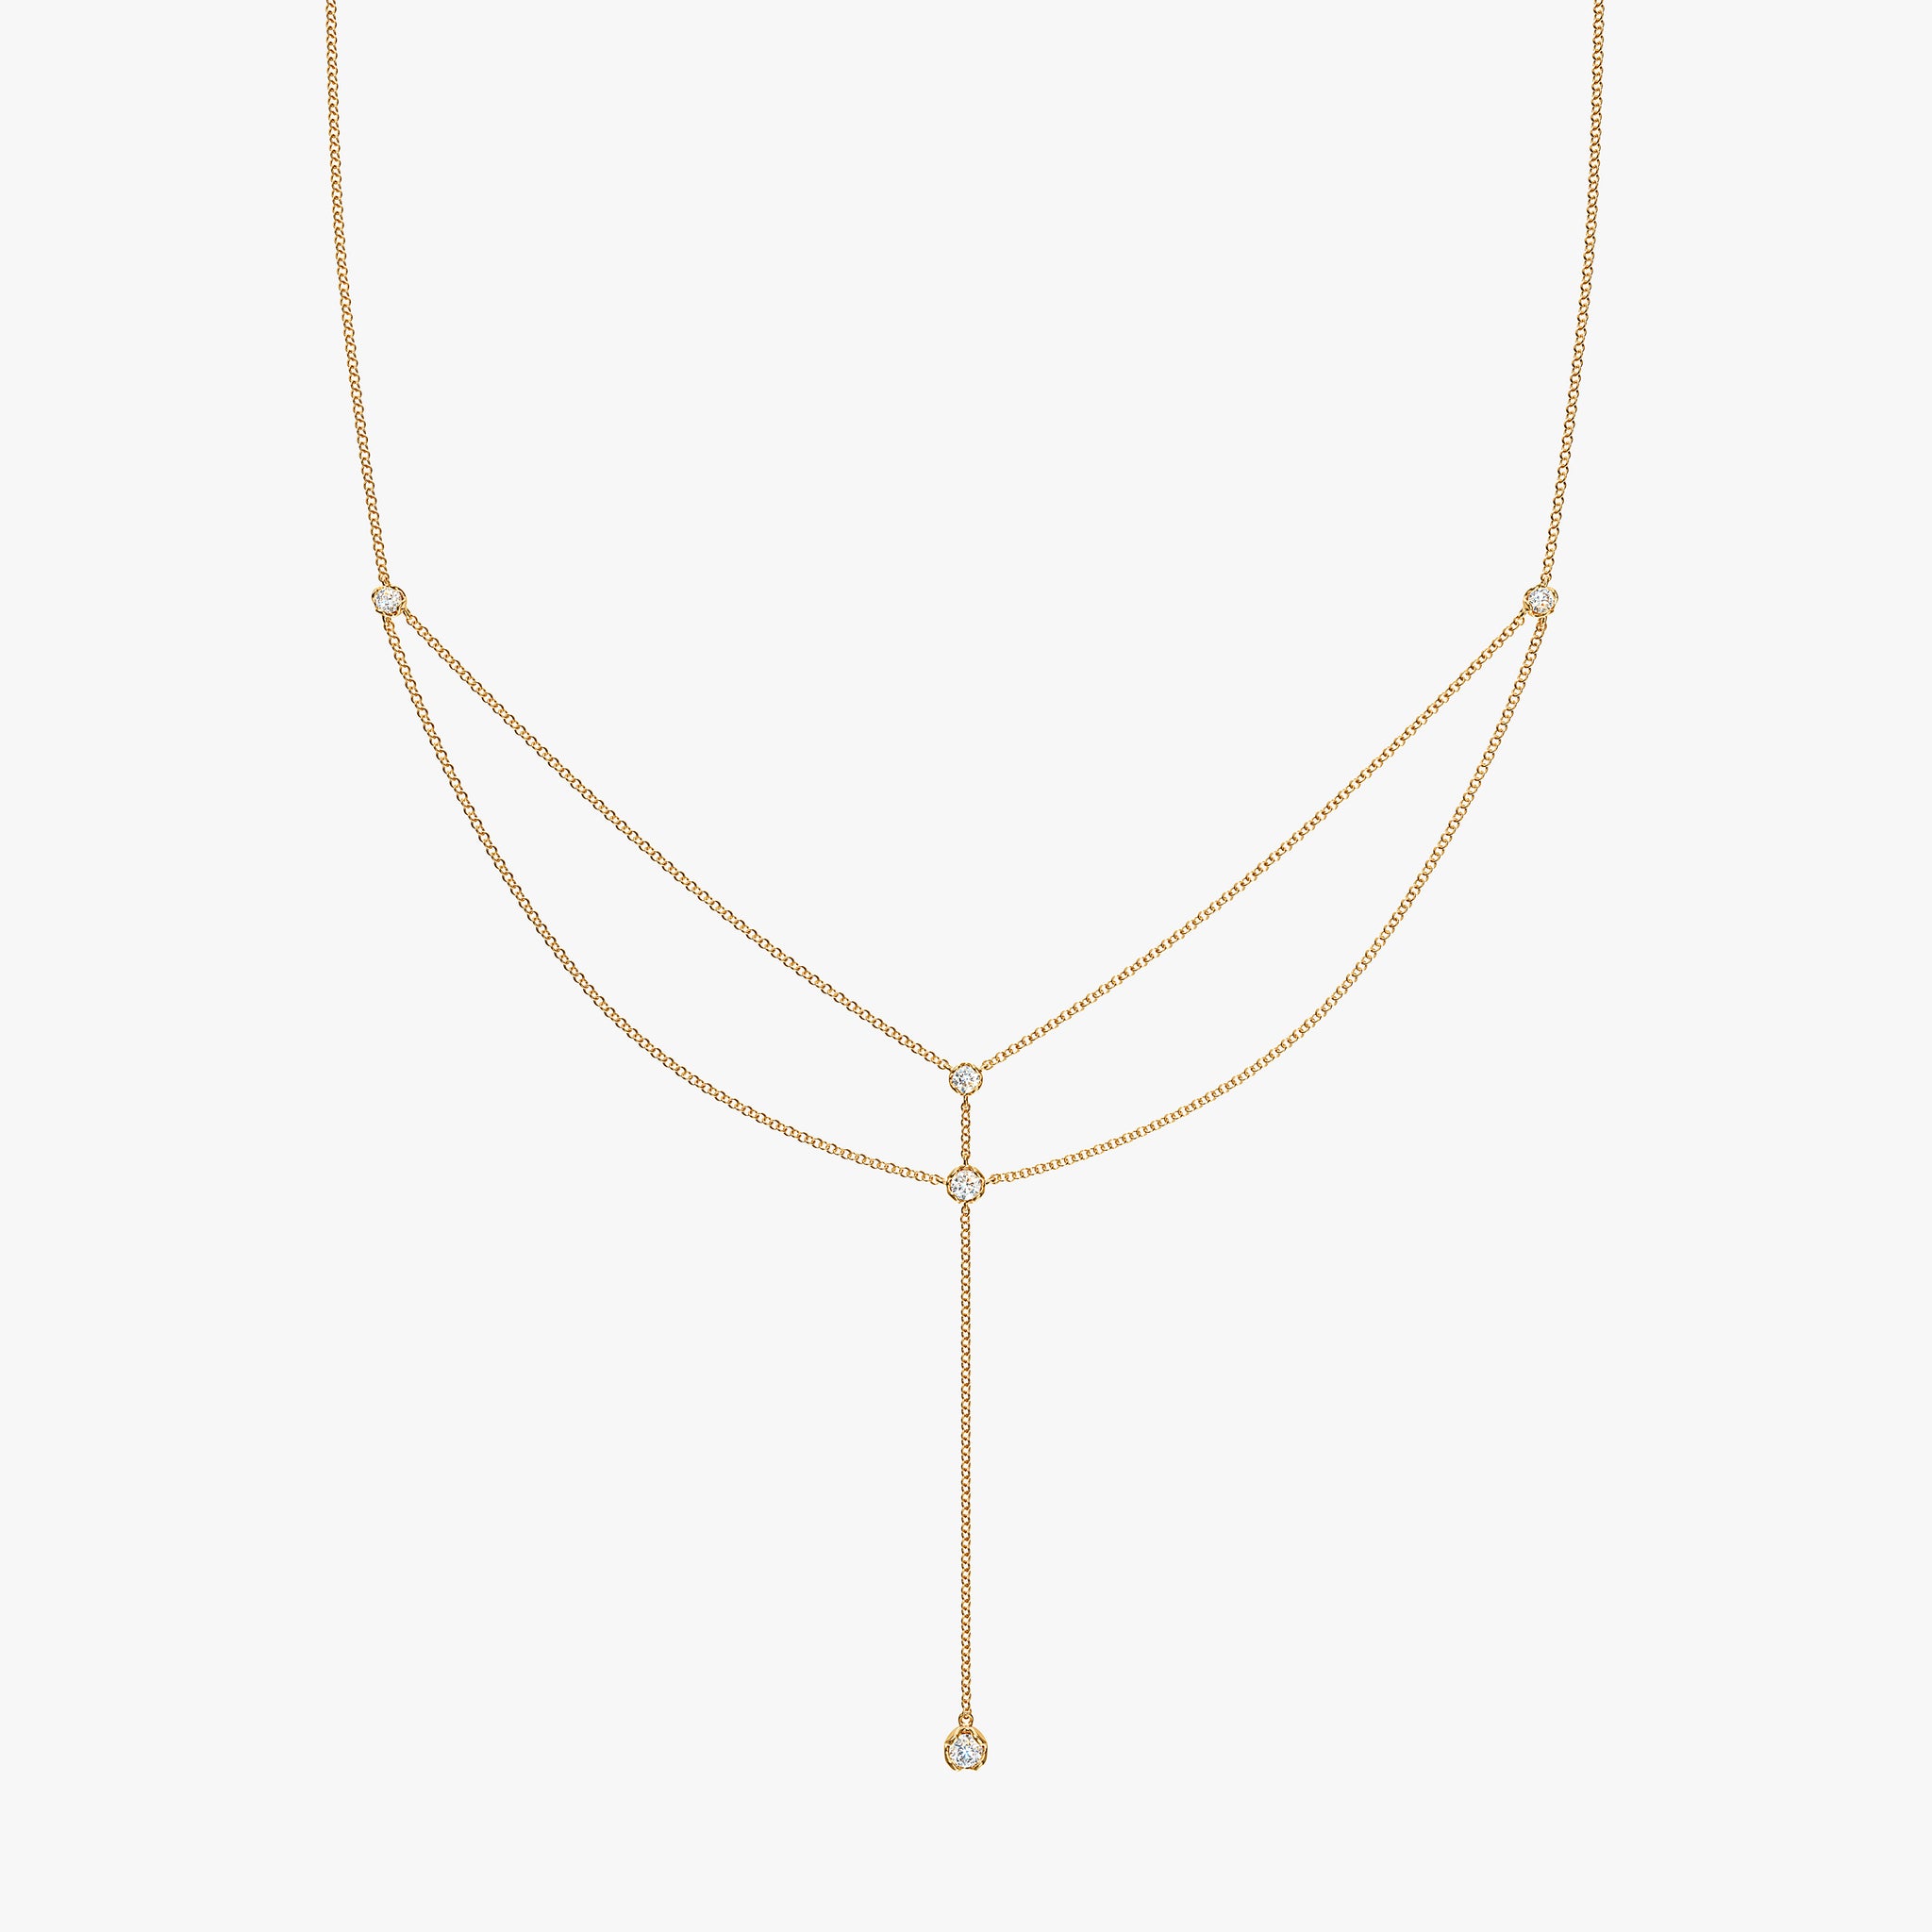 J'EVAR 14KT Yellow Gold Double-Layered Lariat ALTR Lab Grown Diamond Necklace Front View